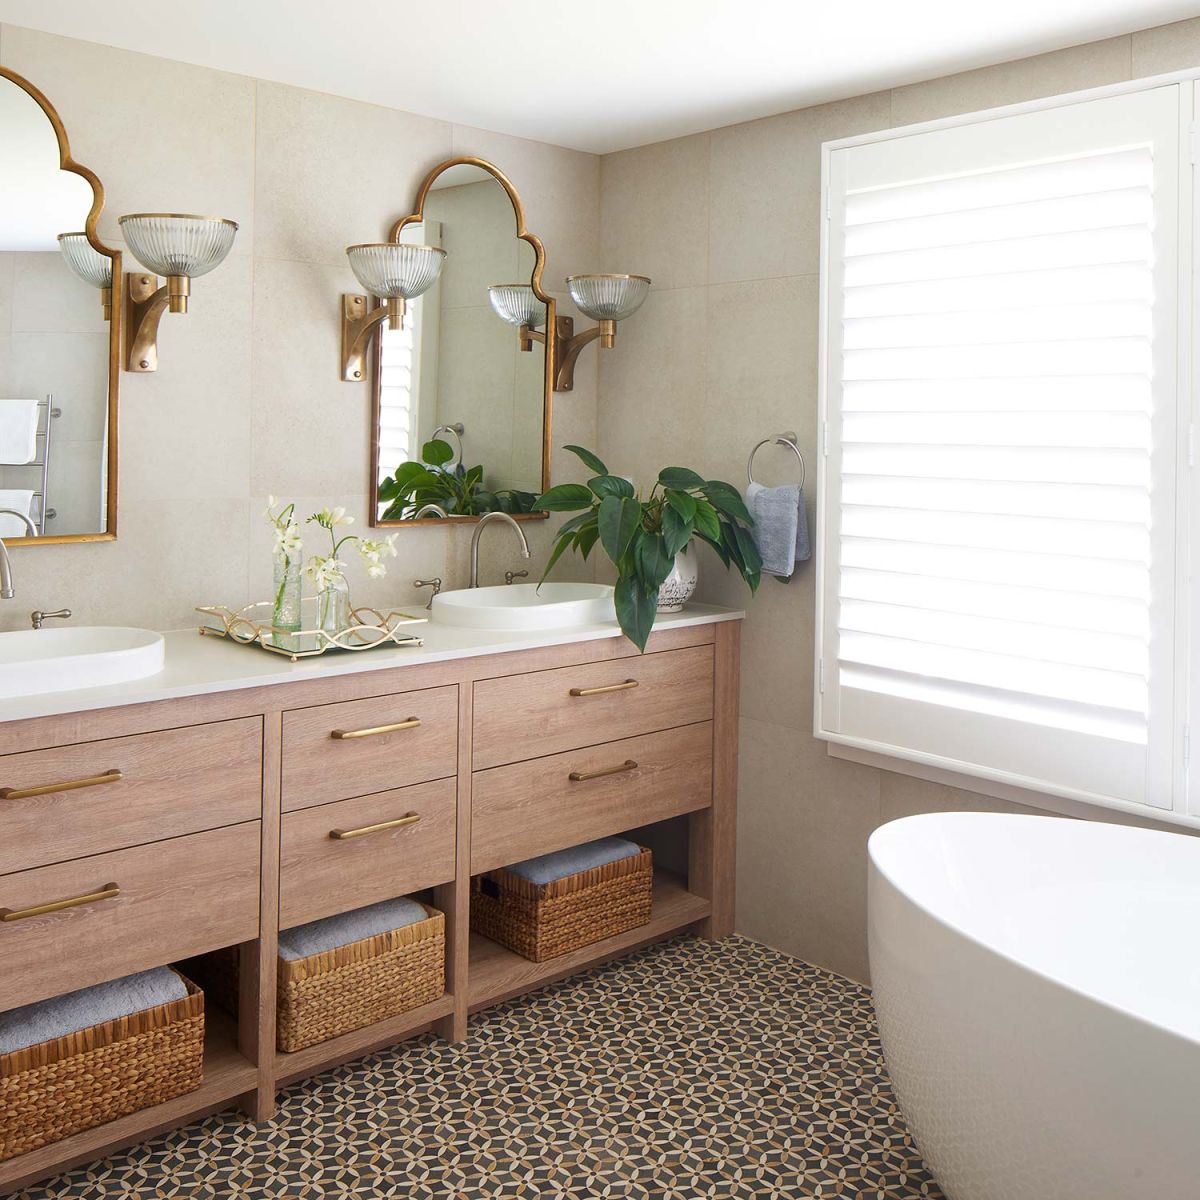 Neutral and Natural Bathroom Styling - No Chintz Textiles